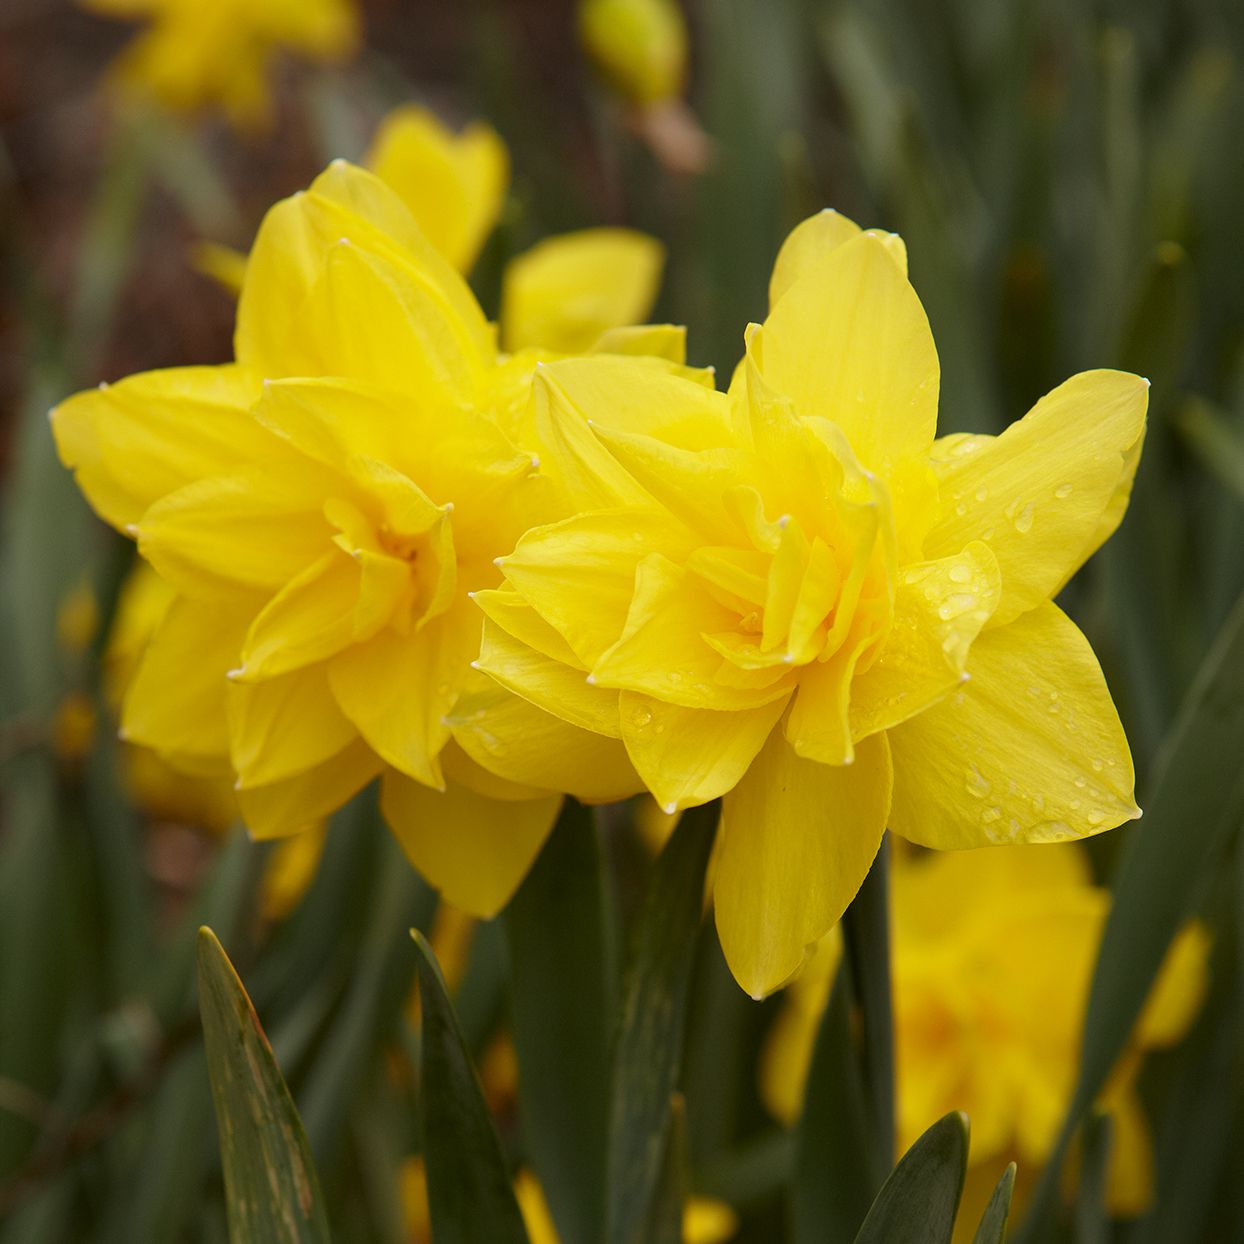 two golden ducat double daffodils